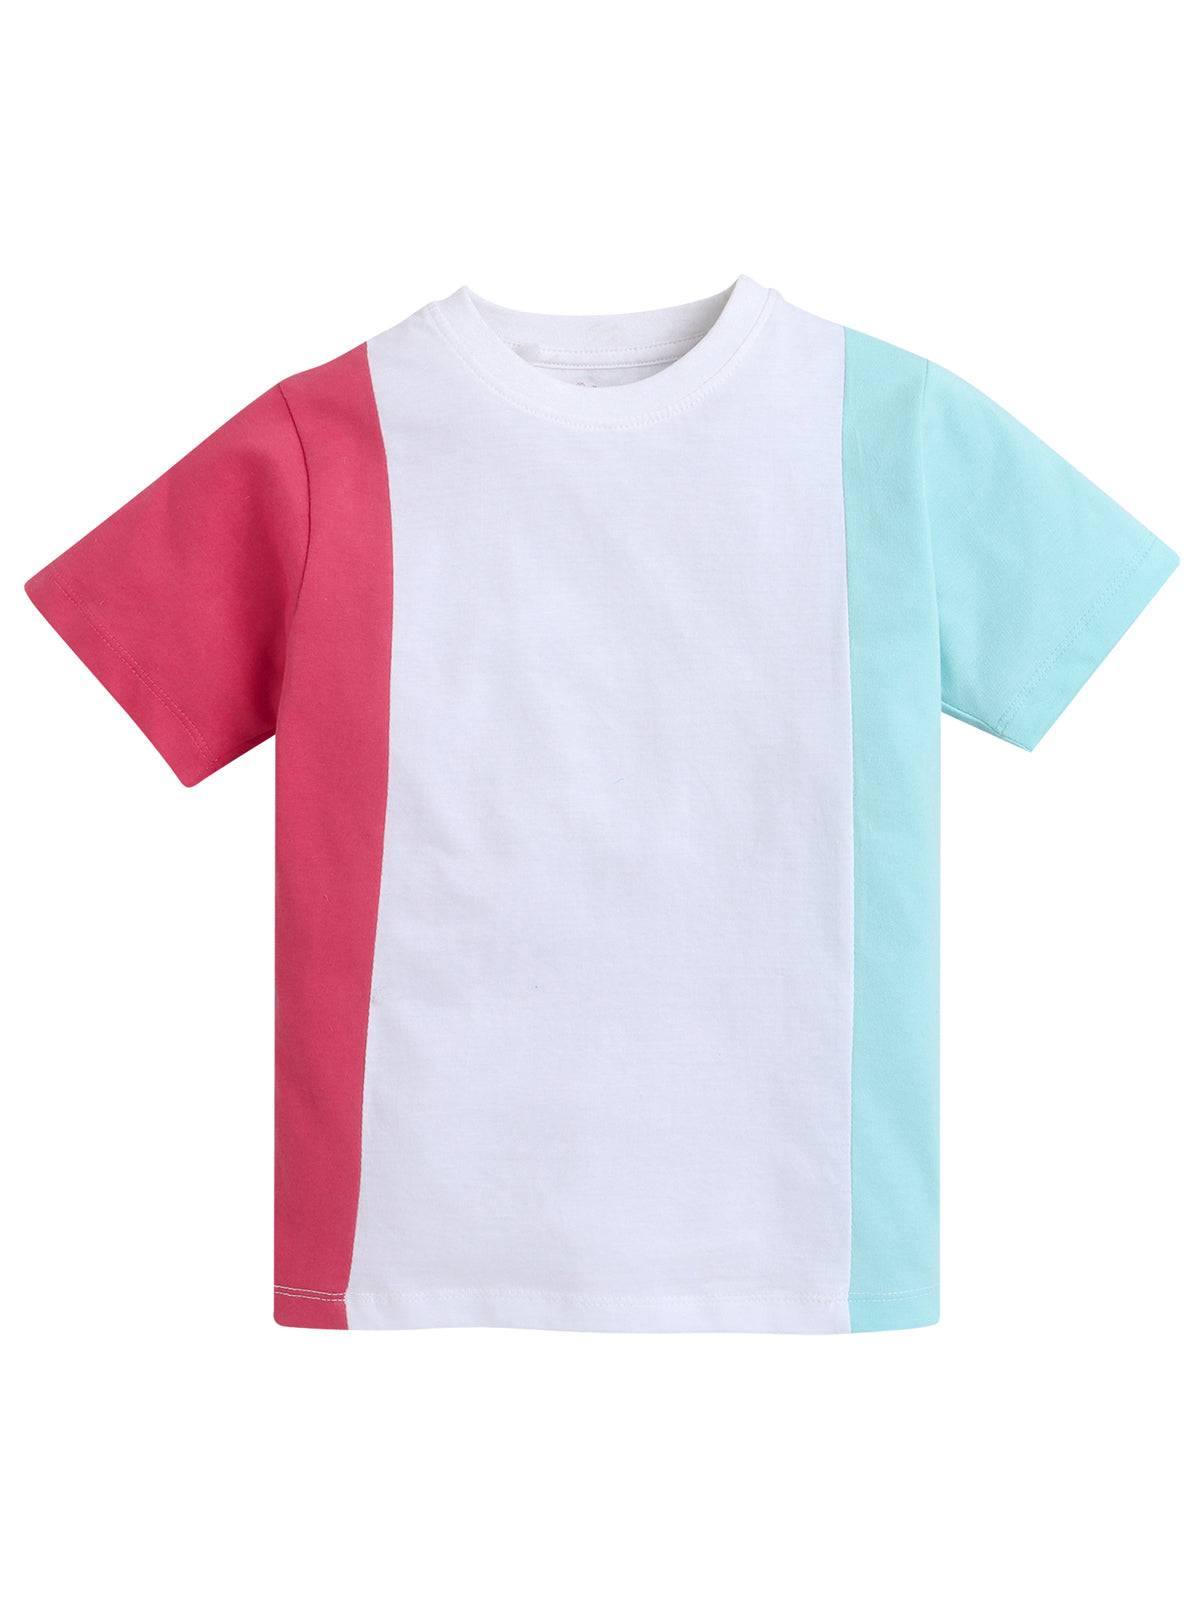 Pack of 2 Unisex Cotton T-shirts in Assorted Colors - 6 to 8 Years